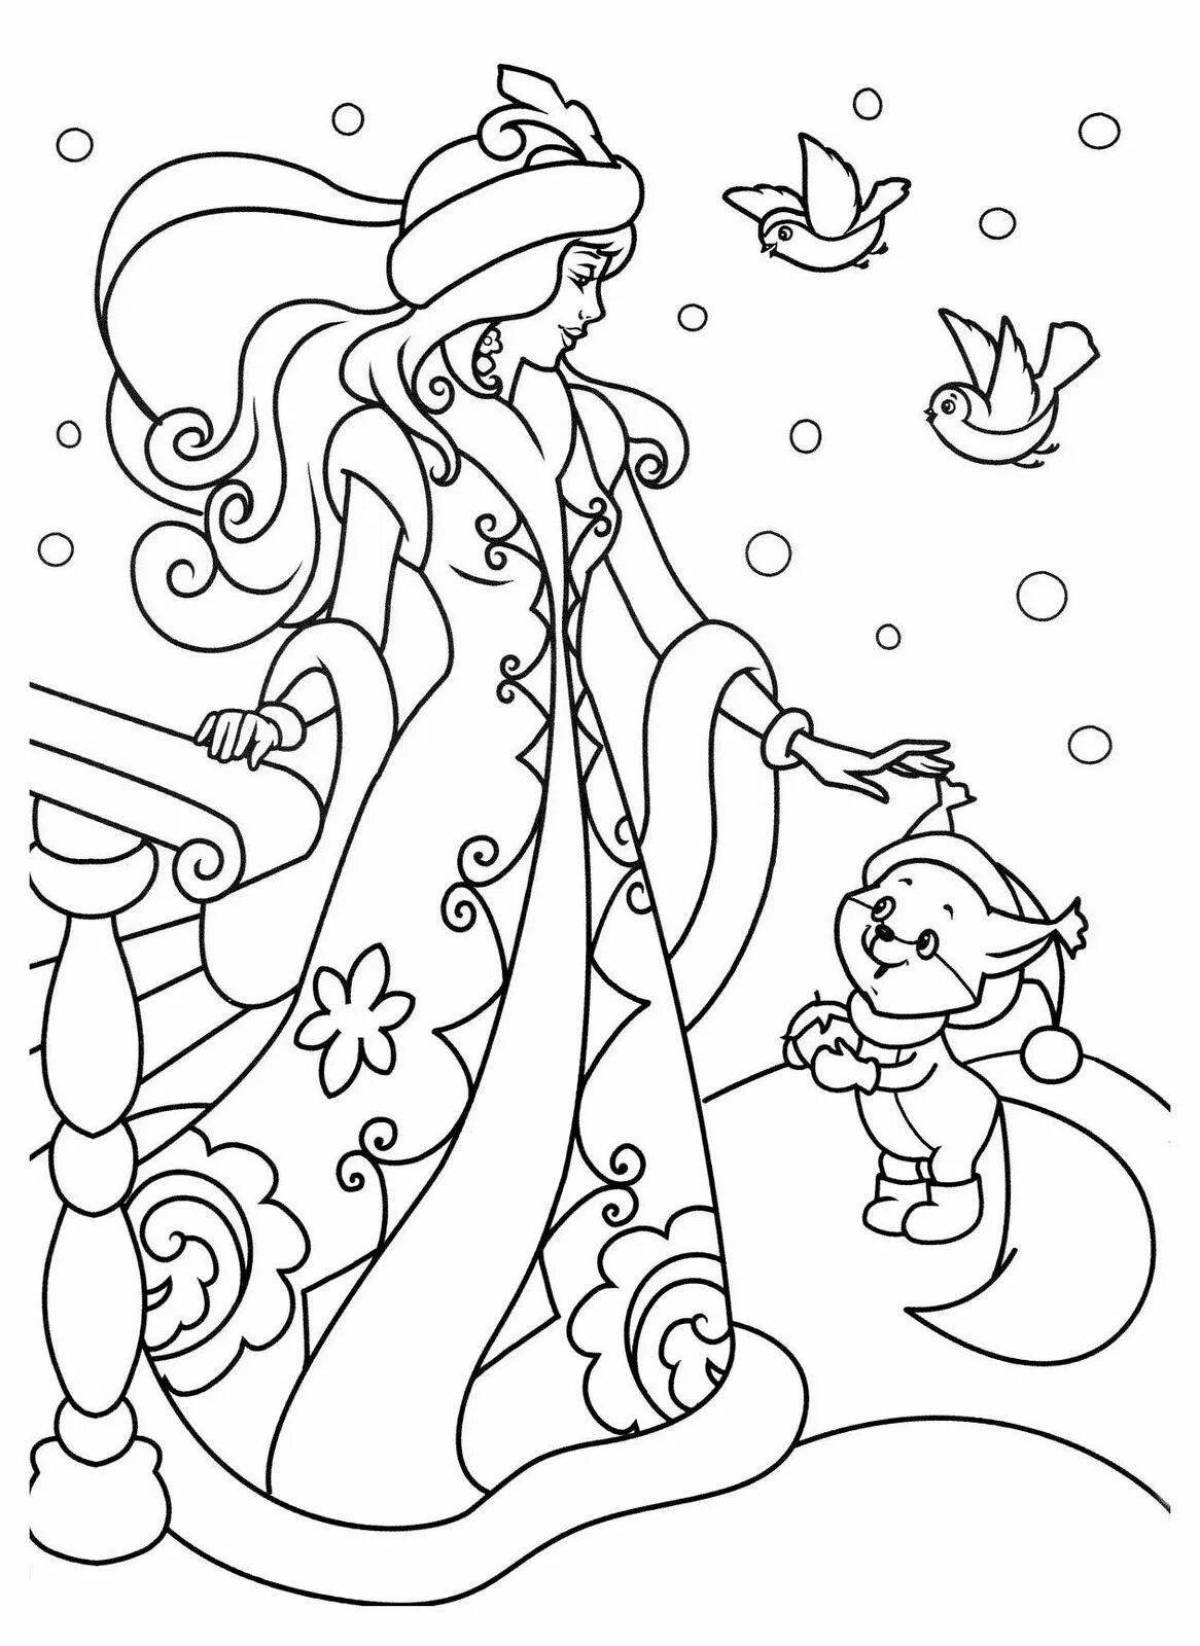 Animated snow maiden coloring book for kids